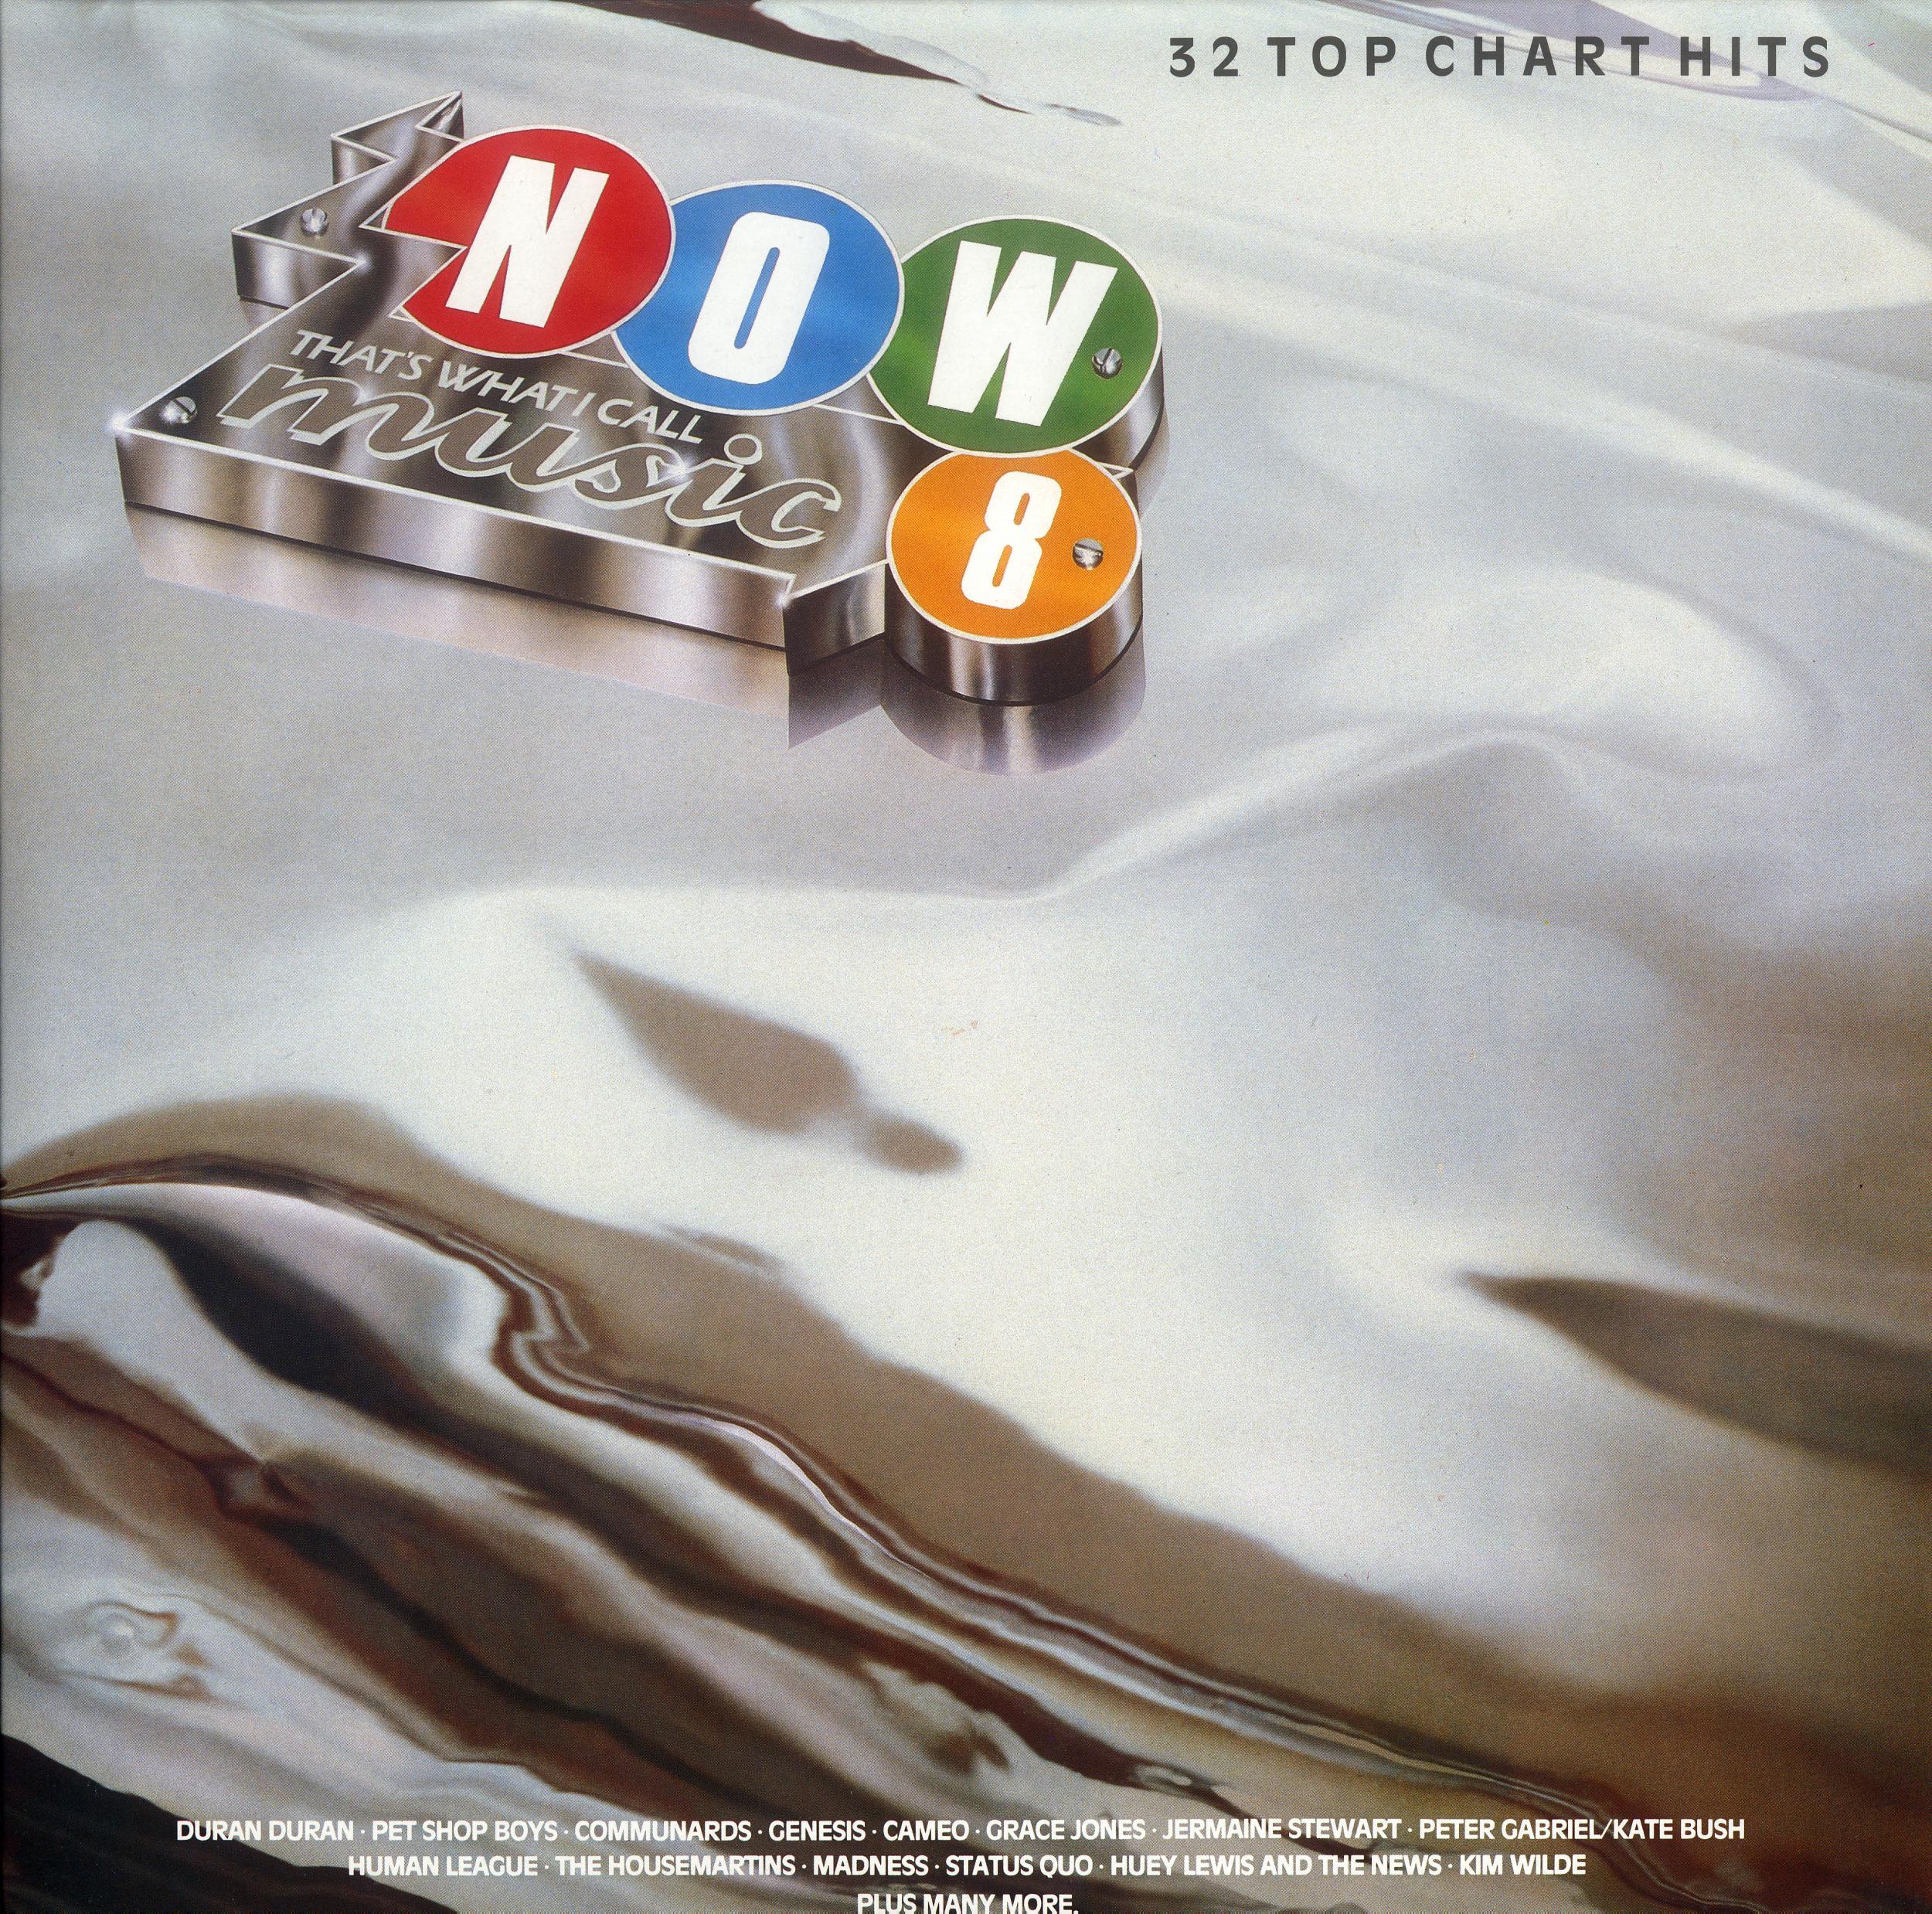 ‘Now That’s What I Call Music 8’ was released in 1986